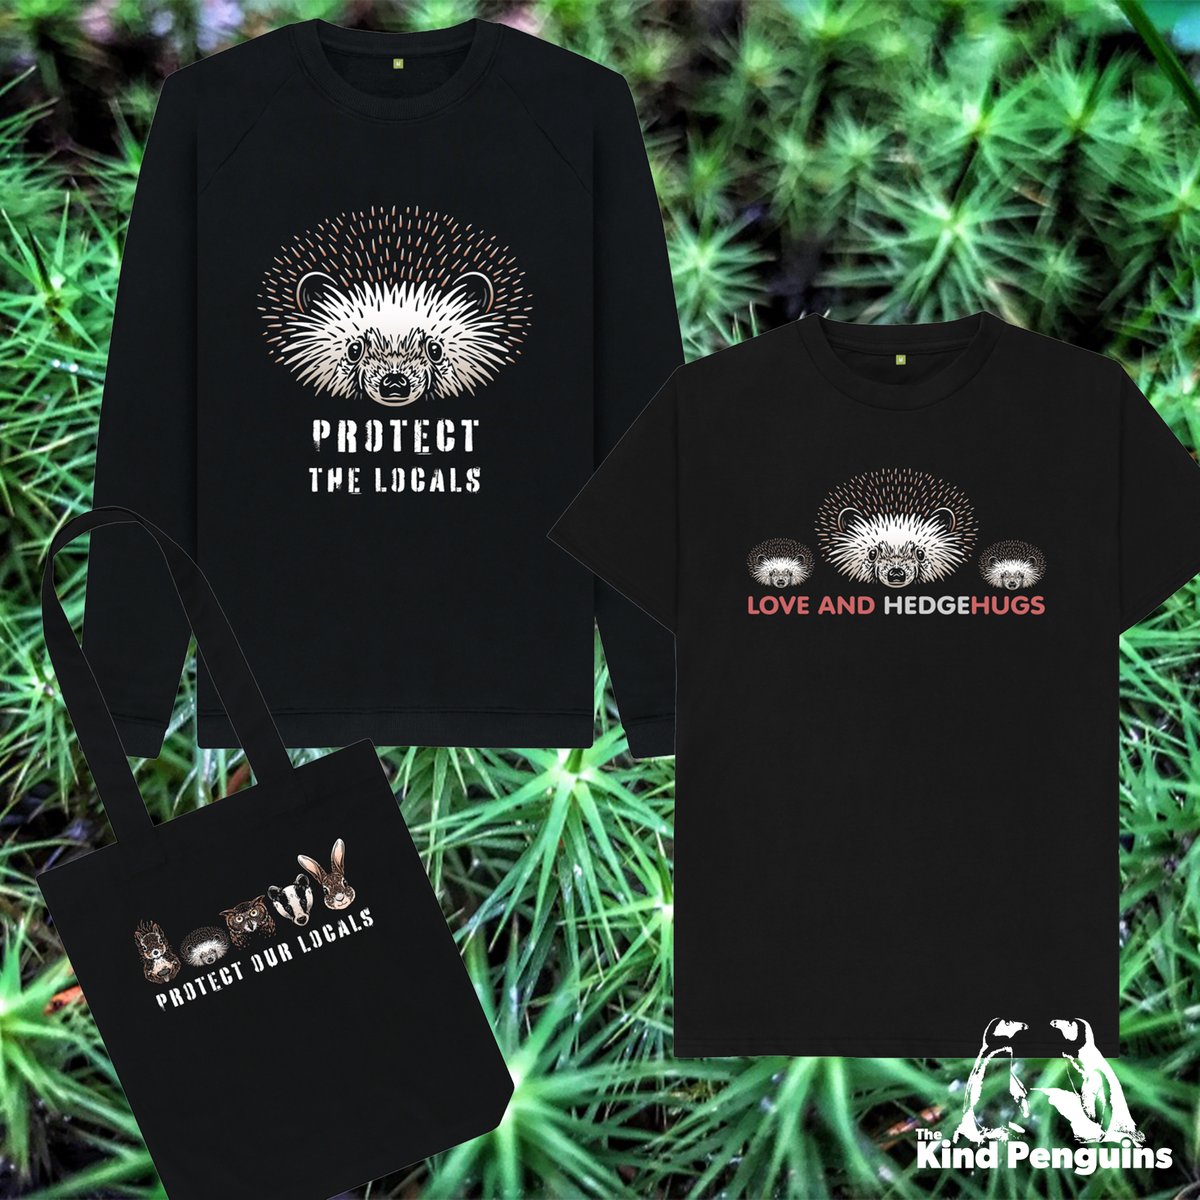 Hedgehogs need help, so we created organic t-shirts, sweatshirts, hoodies and totes, as well as sustainable art prints, to share conservation messages and remind people to protect the locals: kindpenguins.com/search/?term=h…

#mammalsatrisk #hedgehogs #circularfashion #sustainableart